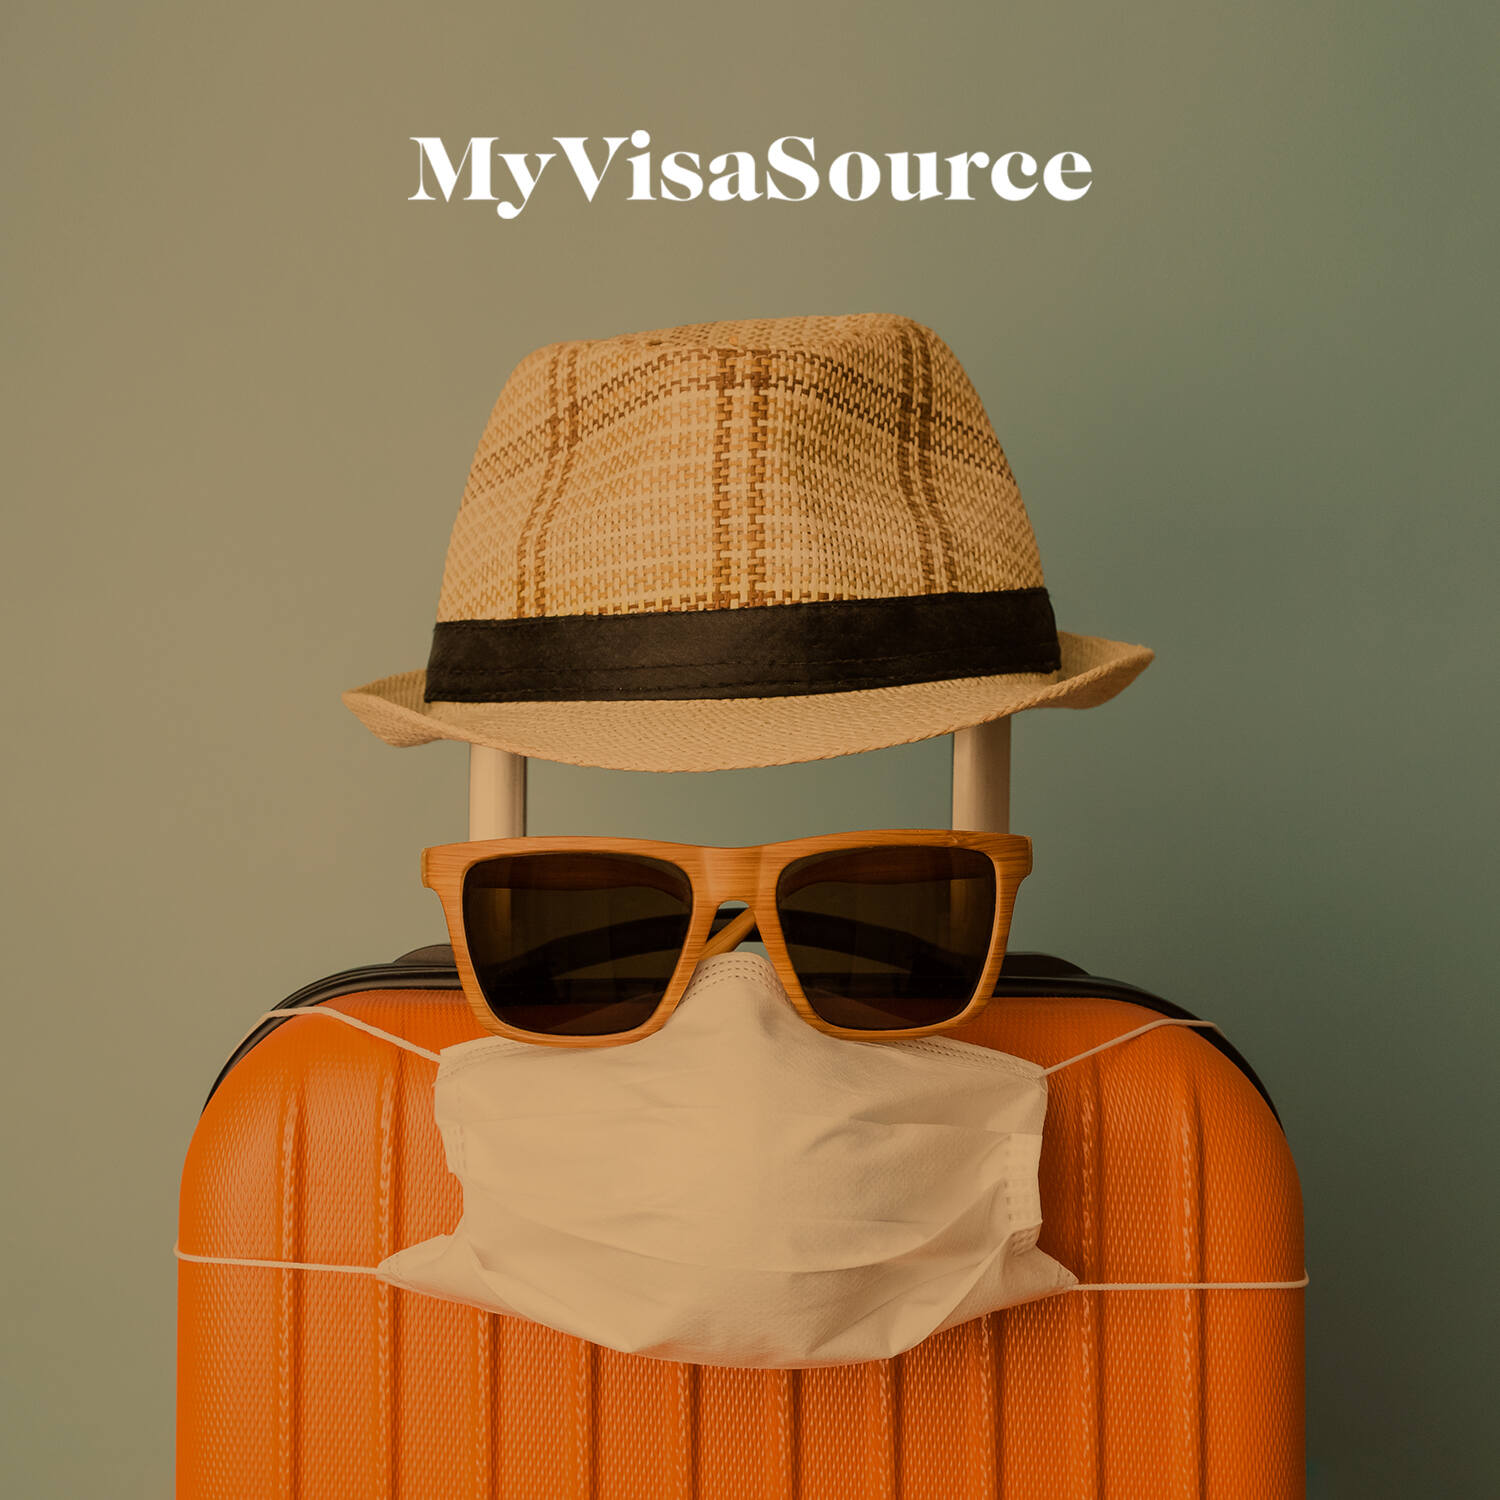 covid mask with sunglasses and hat on top of luggage my visa source